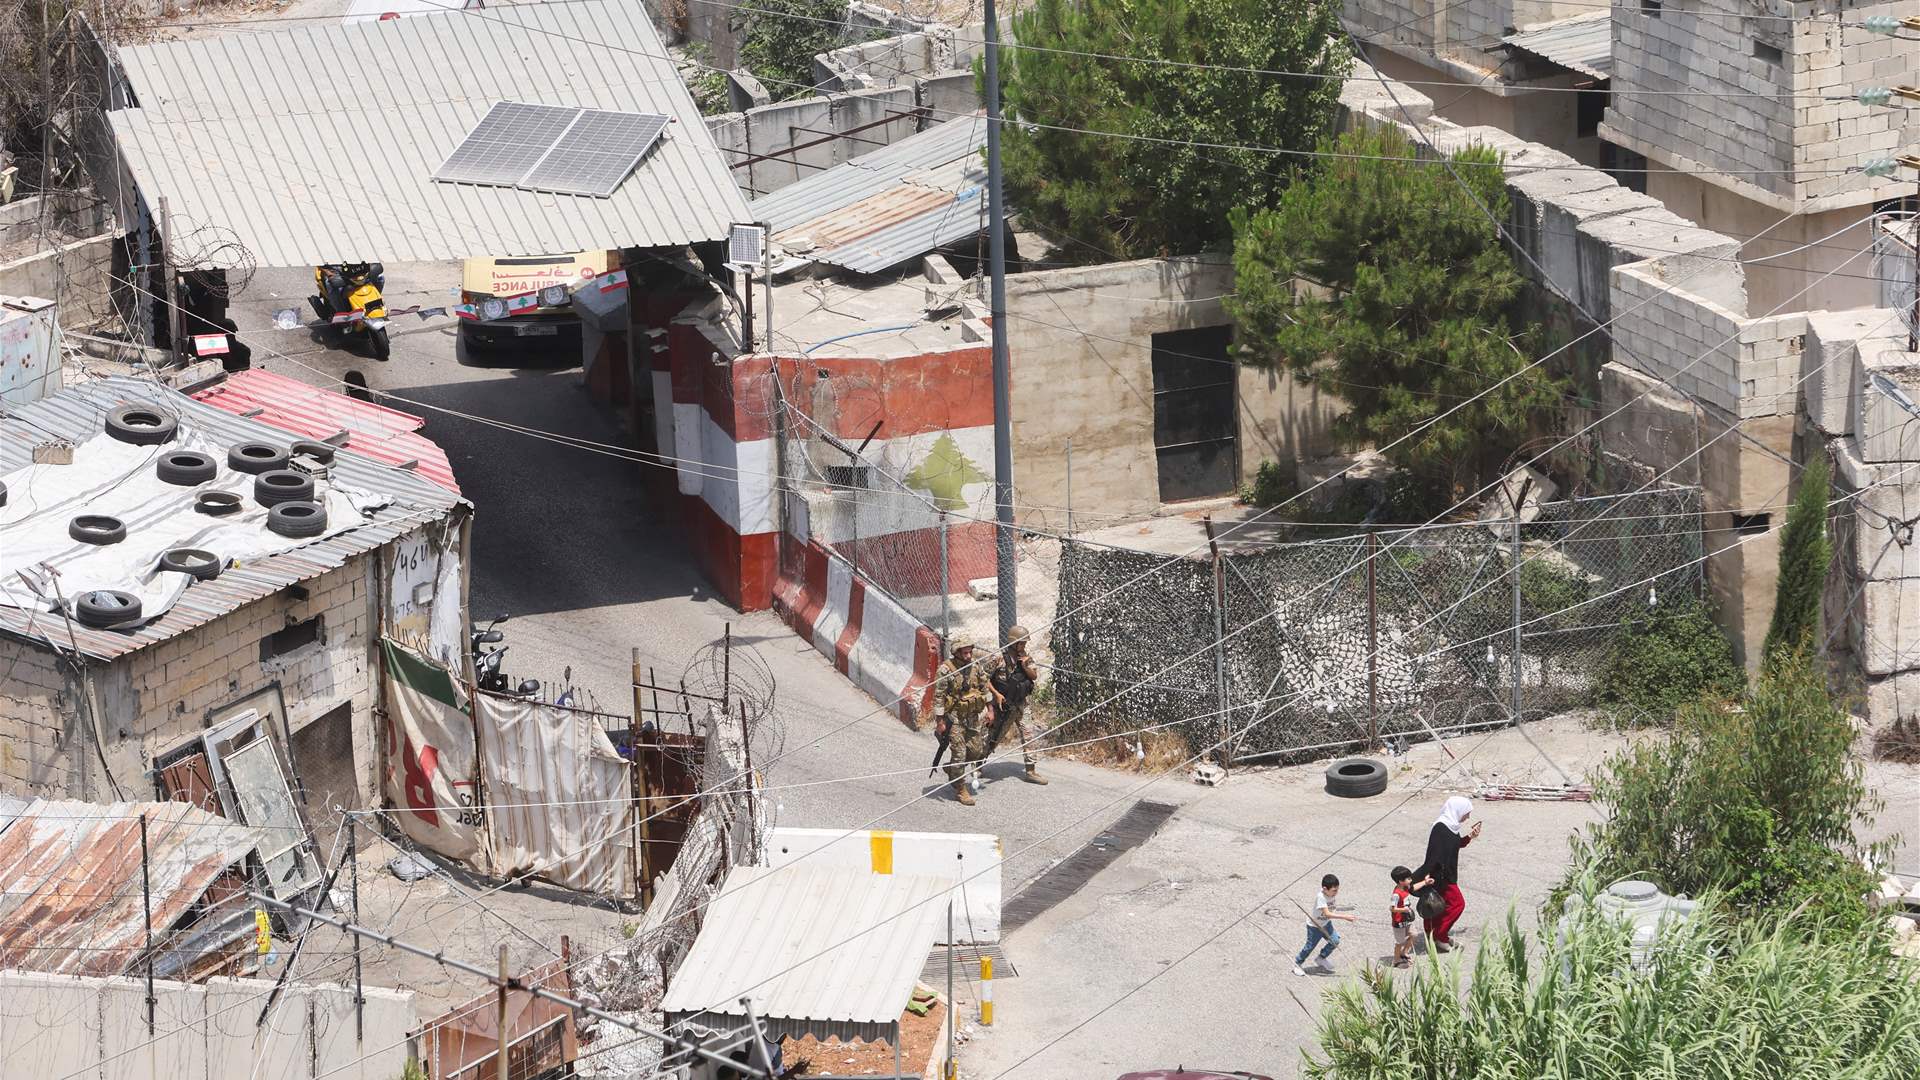 Lebanon&#39;s security concerns: Ain Al-Hilweh and foreign embassies&#39; warning